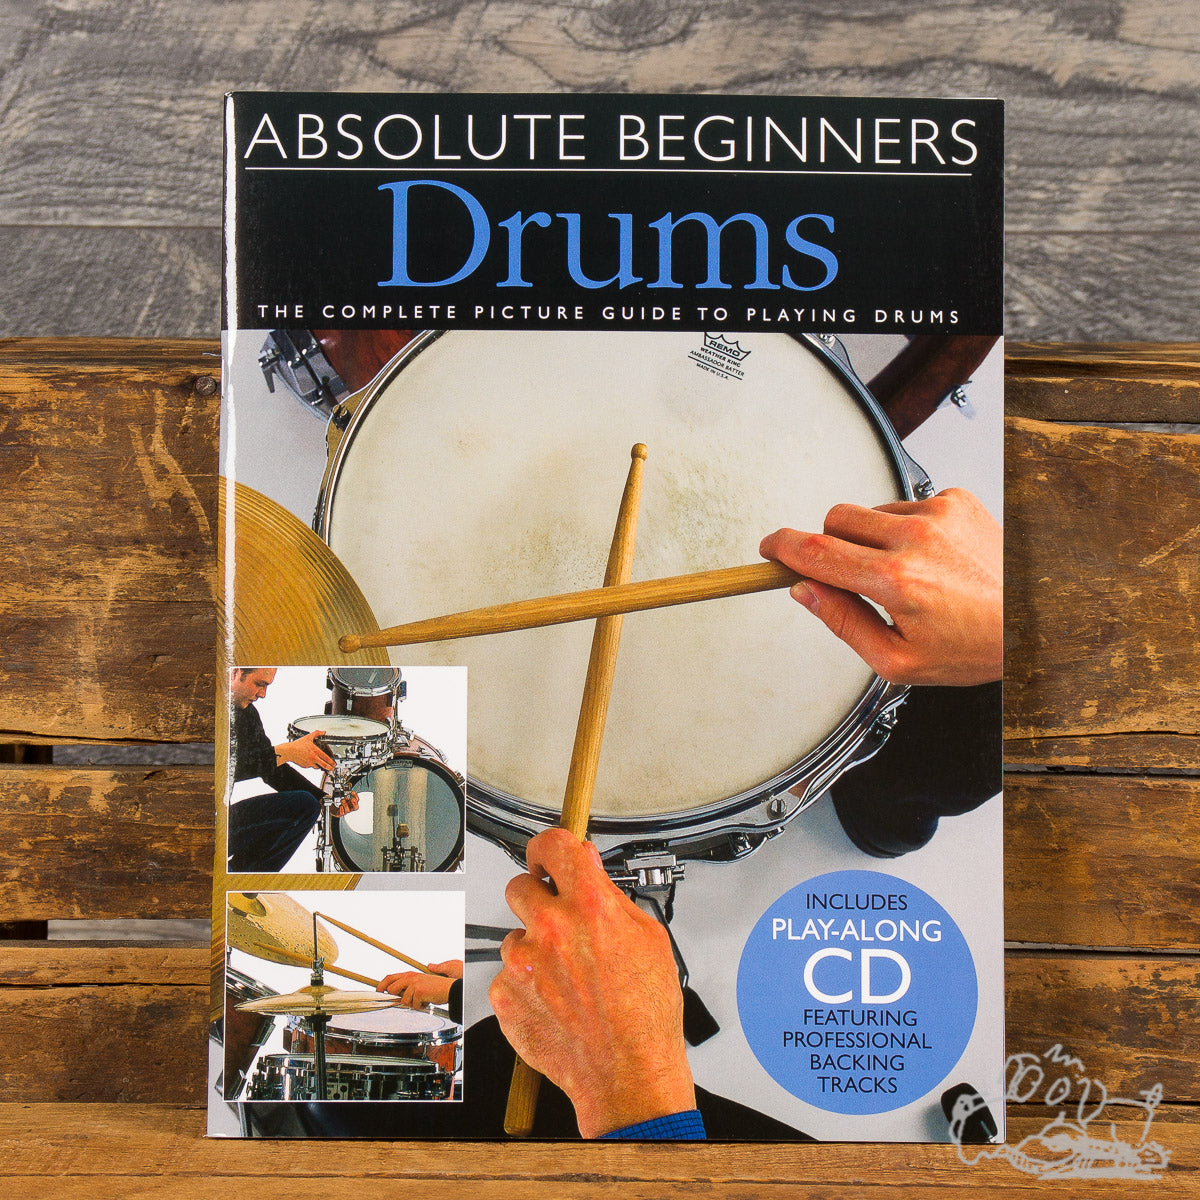 Absolute Beginners for Drums - The Complete Picture Guide to Playing the Drums by Dave Zurbraski - Includes CD